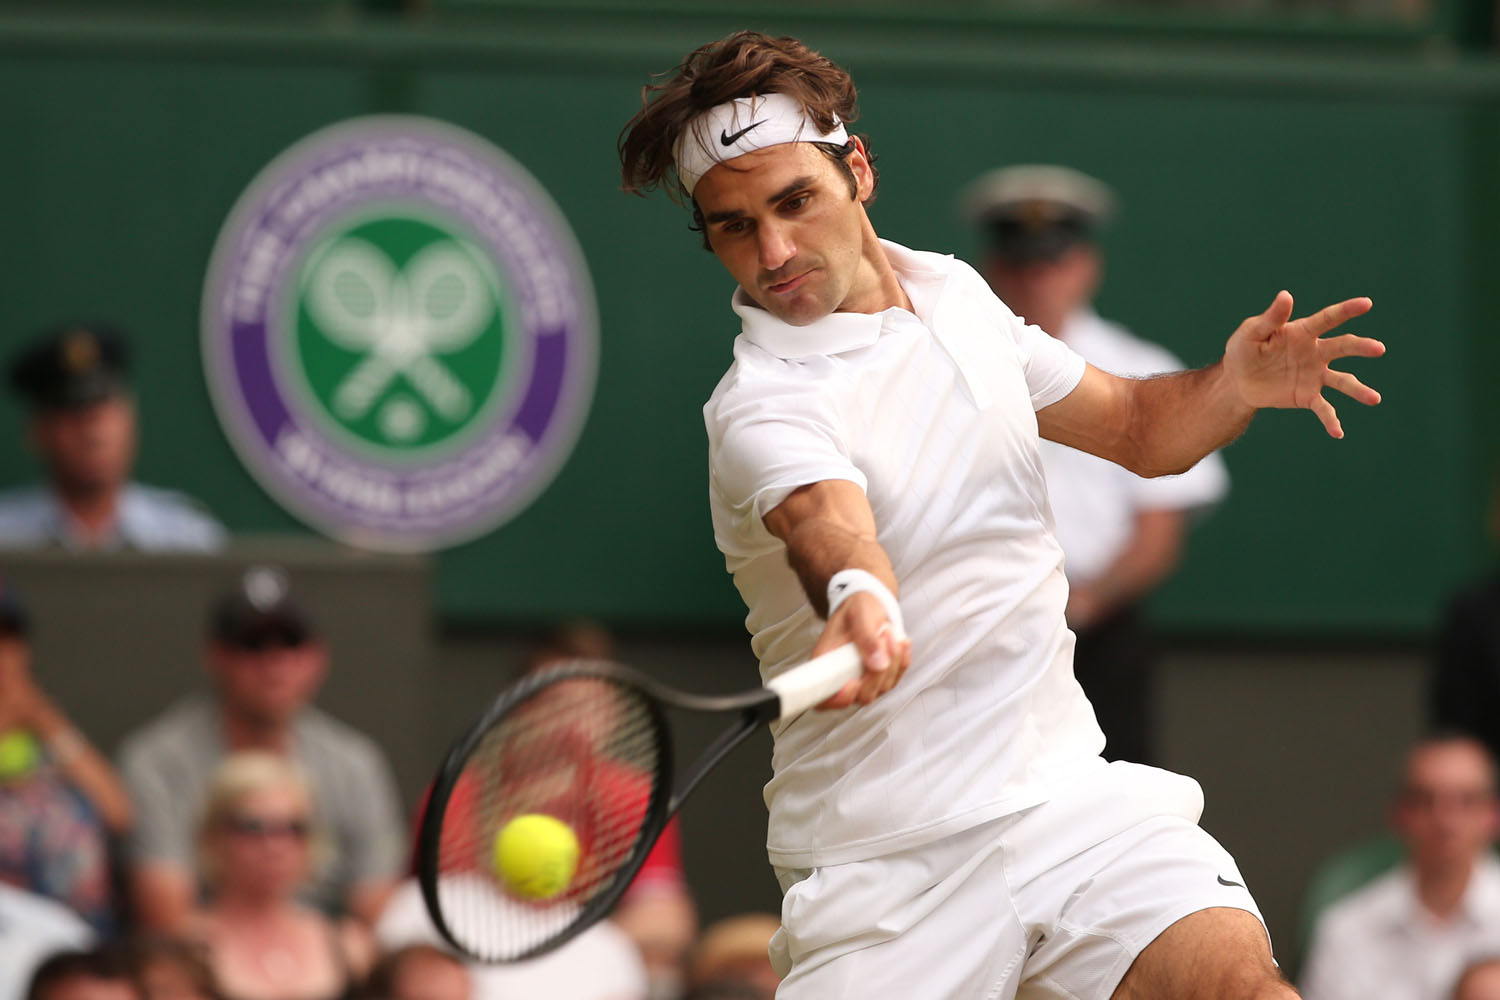 Switzerland's Roger Federer returns to Switzerland's Stanislas Wawrinka during their men's singles quarter-final match on day nine of the 2014 Wimbledon Championships at The All England Tennis Club in Wimbledon, southwest London, on July 2, 2014. AFP PHOTO / ANDREW YATES - RESTRICTED TO EDITORIAL USE (Photo credit should read ANDREW YATES/AFP/Getty Images)